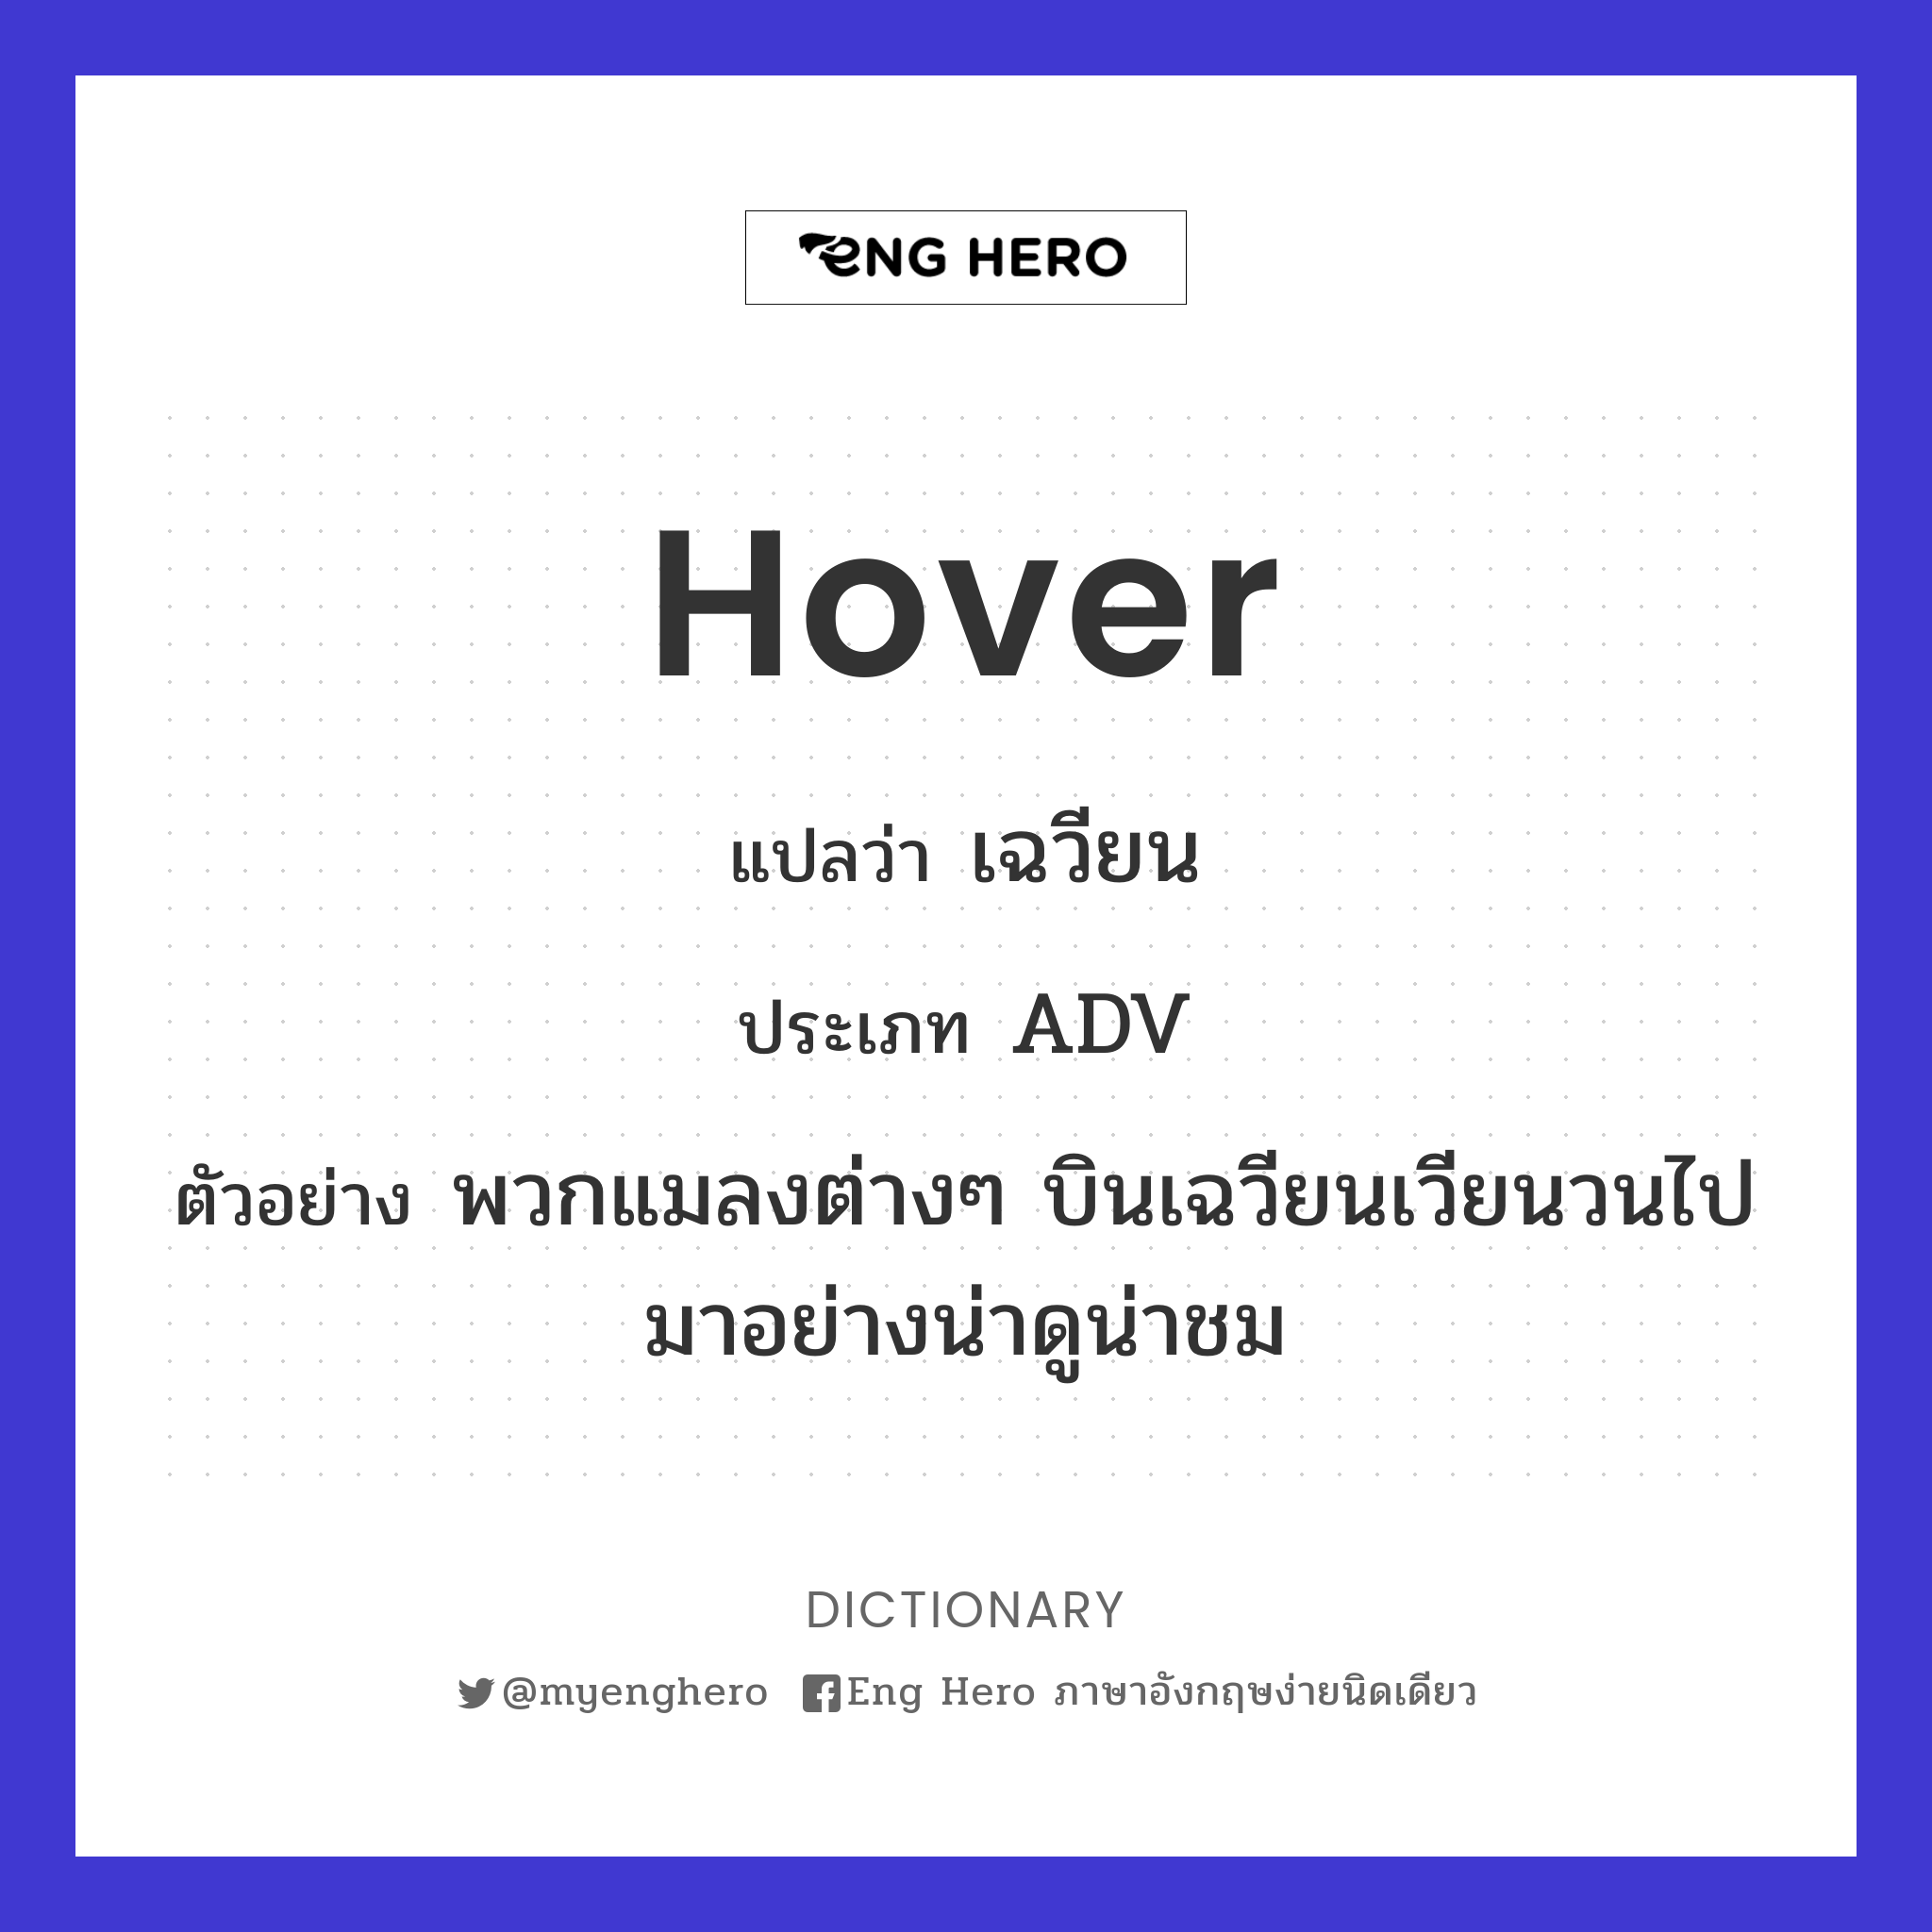 hover